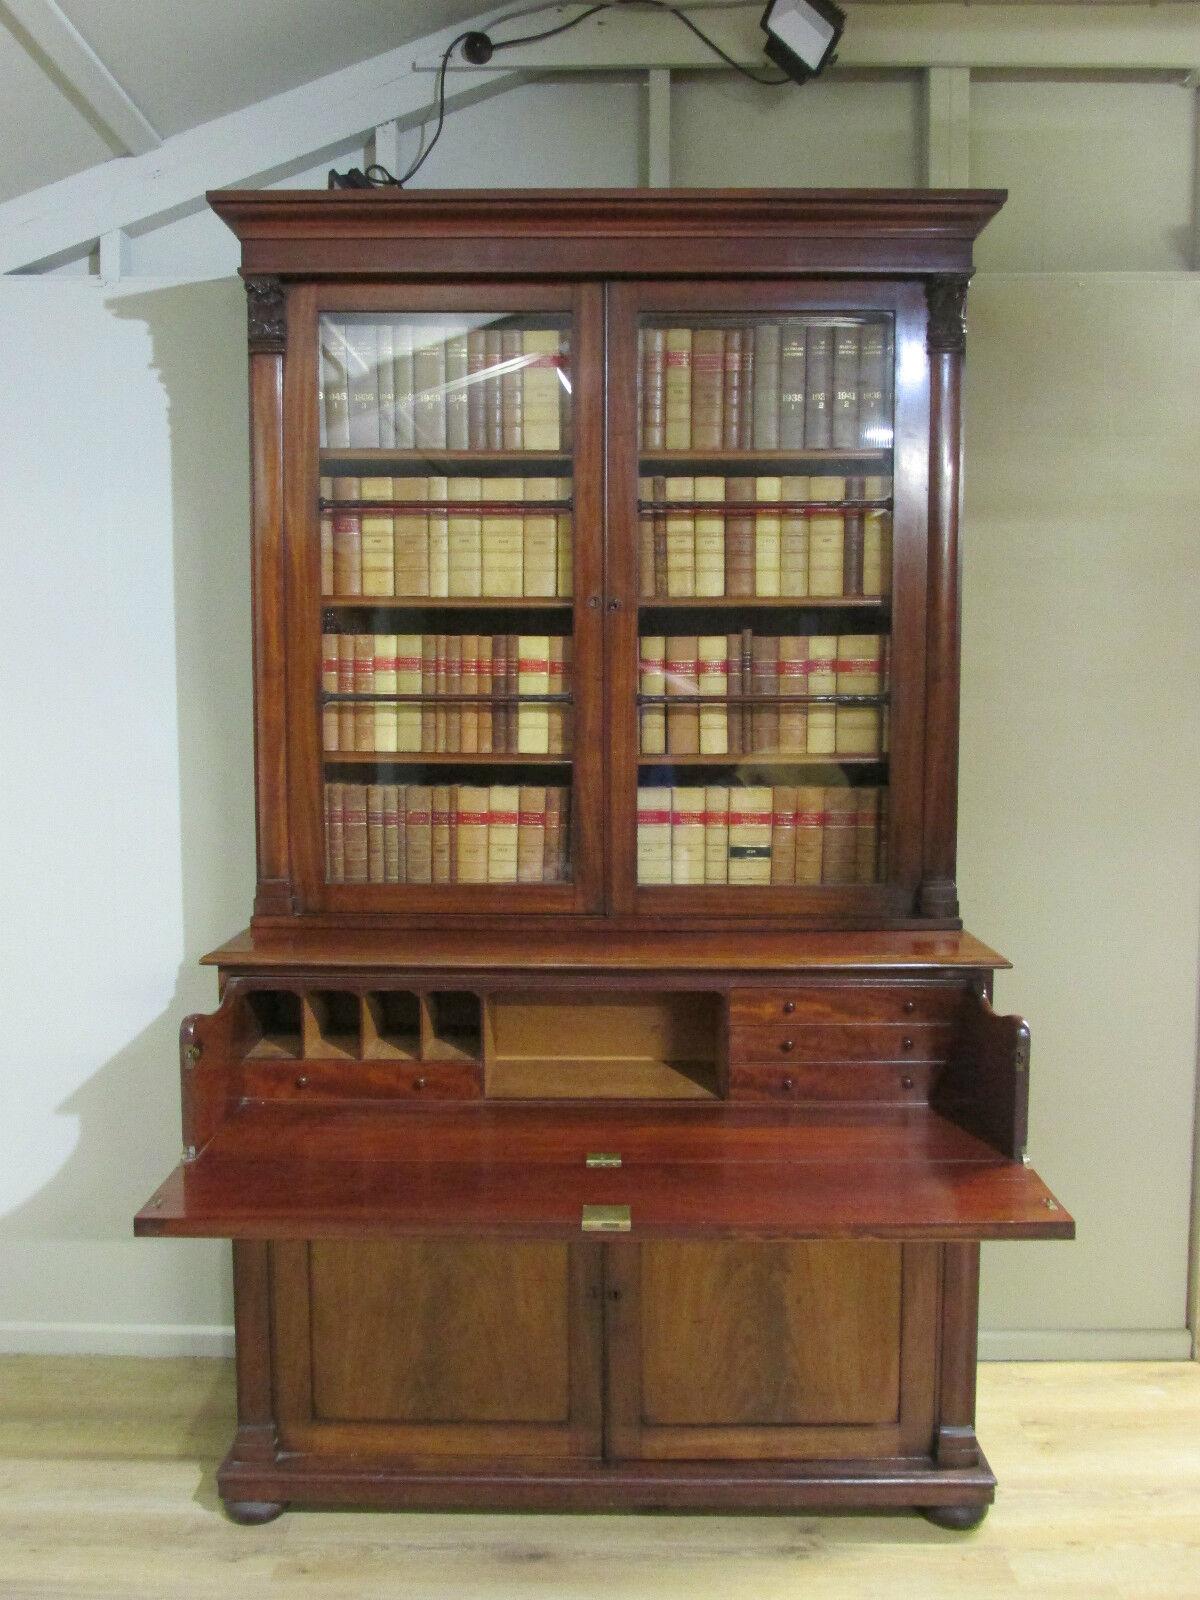 Sumptuous Victorian secretaire bookcase we date to circa 1840
Glass fronted top for the books
Below this the secretaire desk section opens up to reveal writing surface and drawers
Bought from a private residenc in London's Belsize Park
Offered in